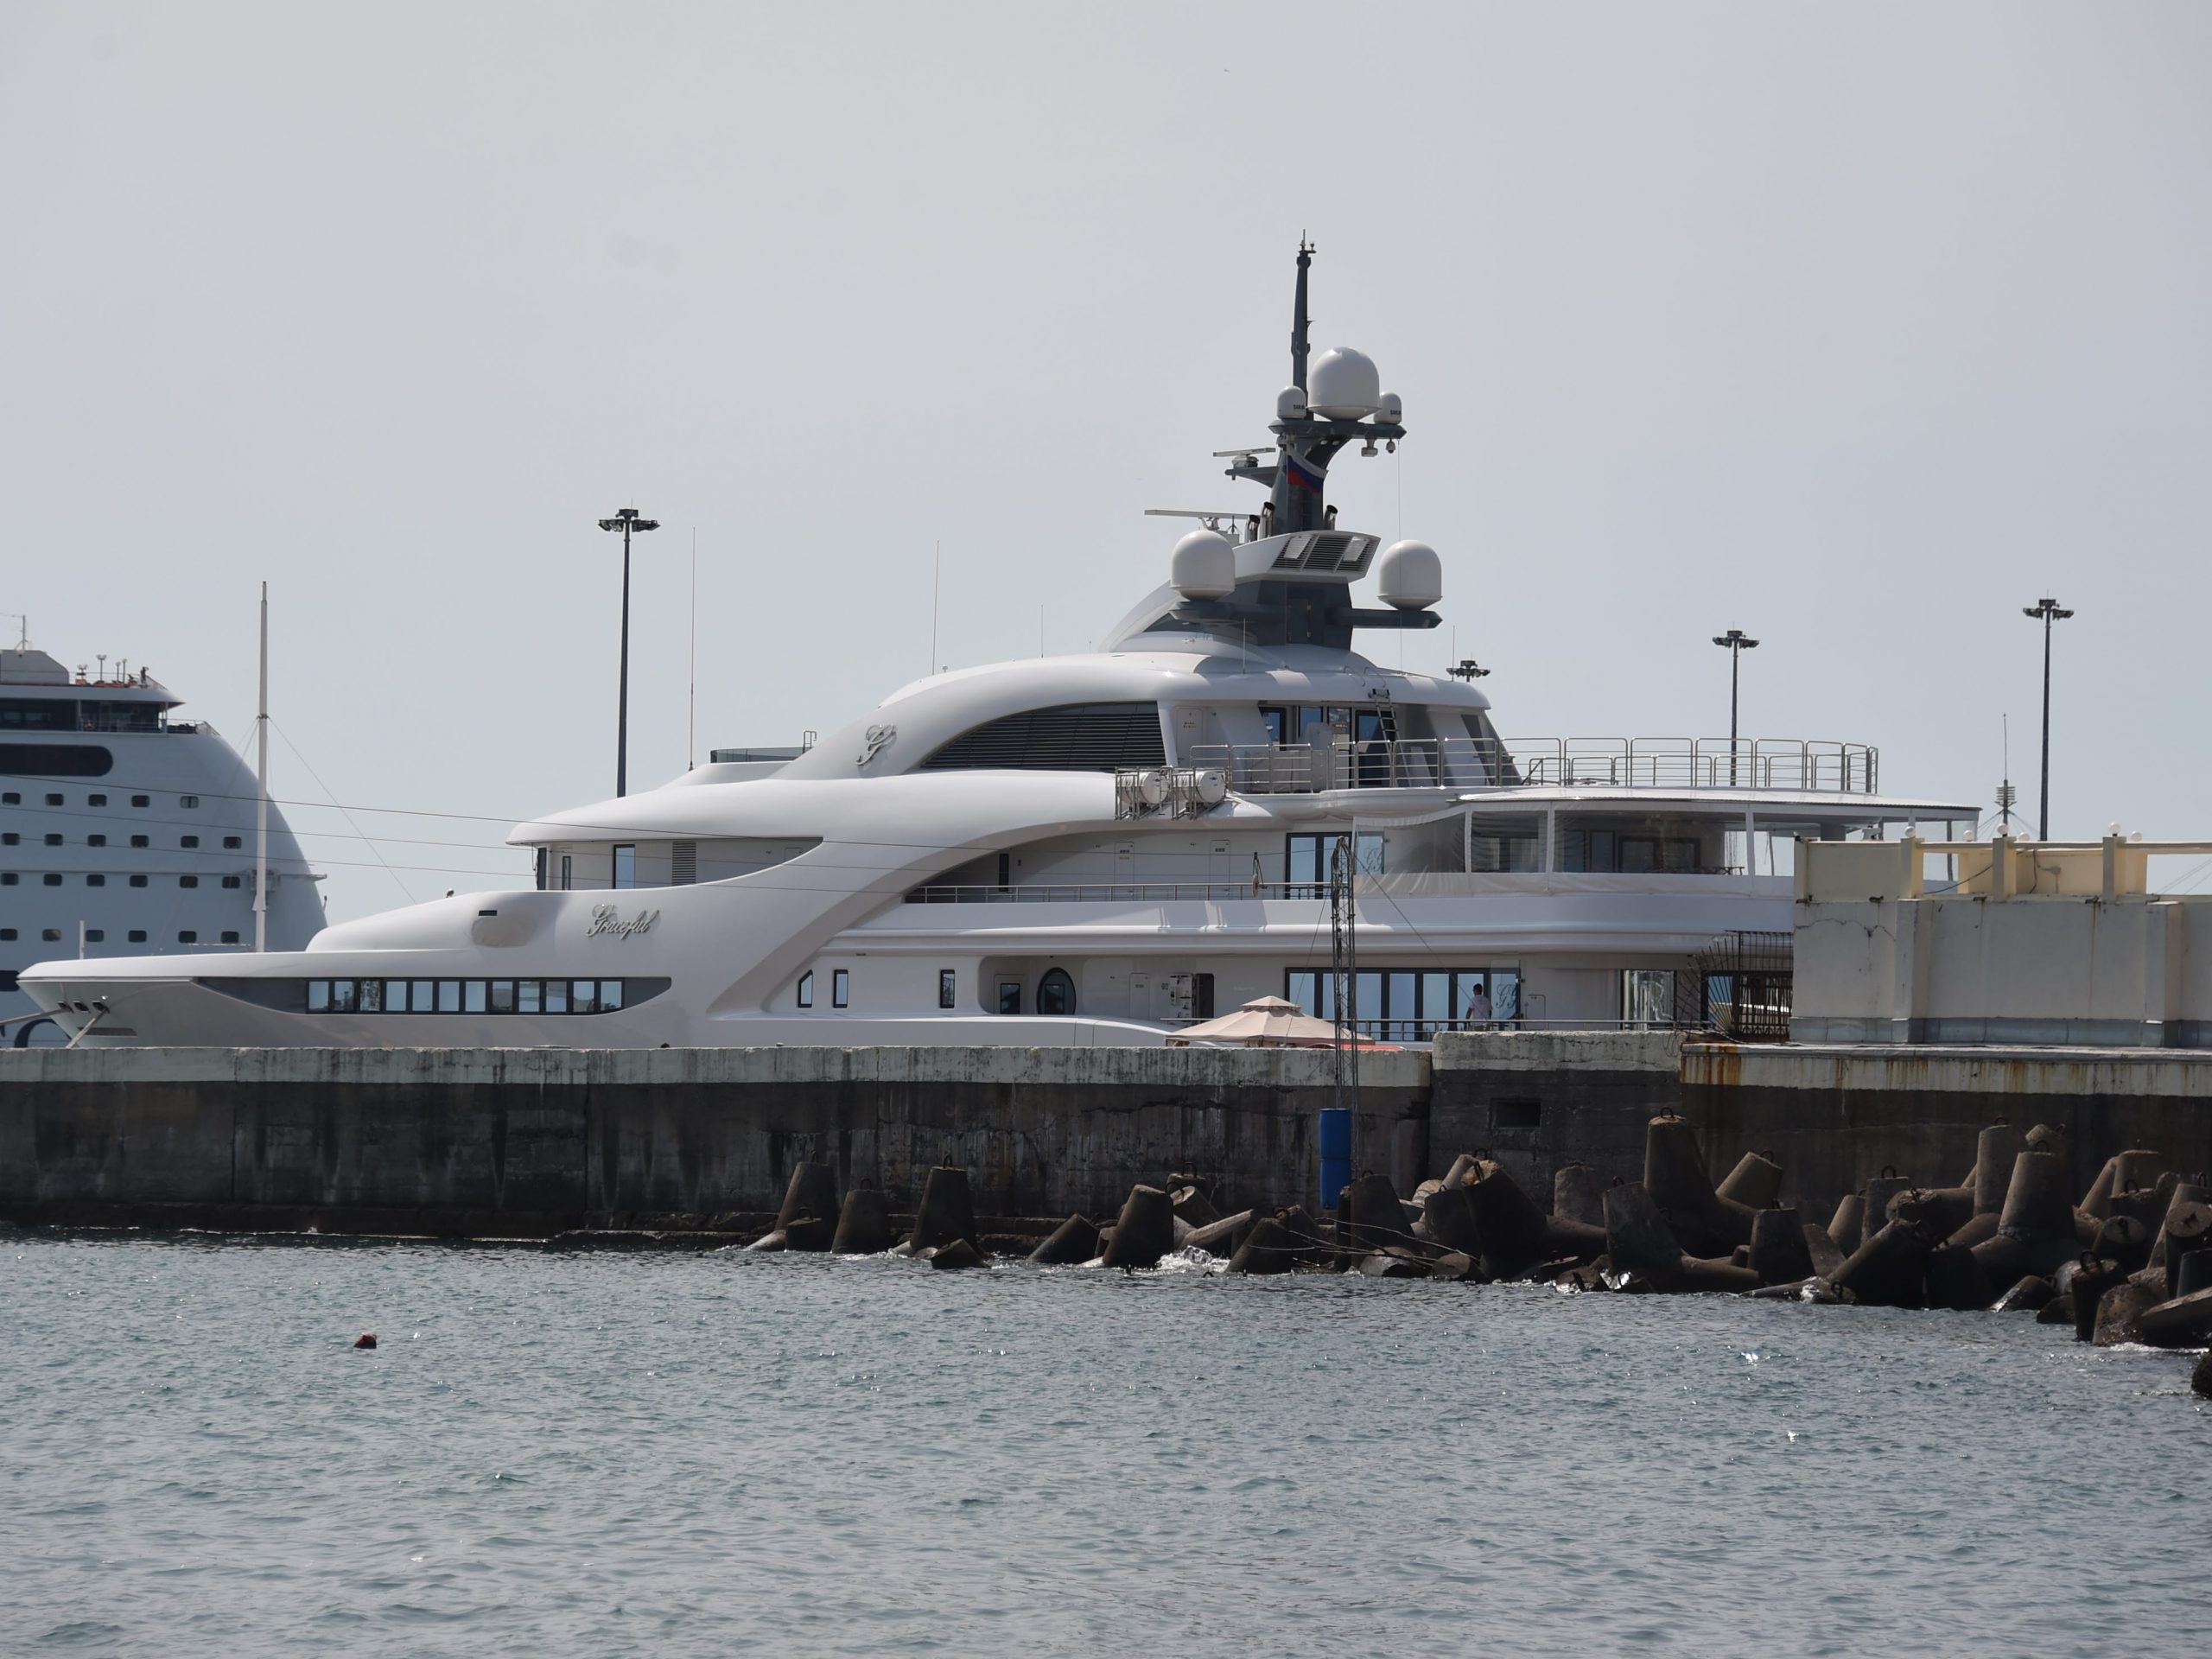 The yacht 'Graceful' of Russian President Vladimir Putin is moored at the port of Sochi, Russia, 13 July 2015.